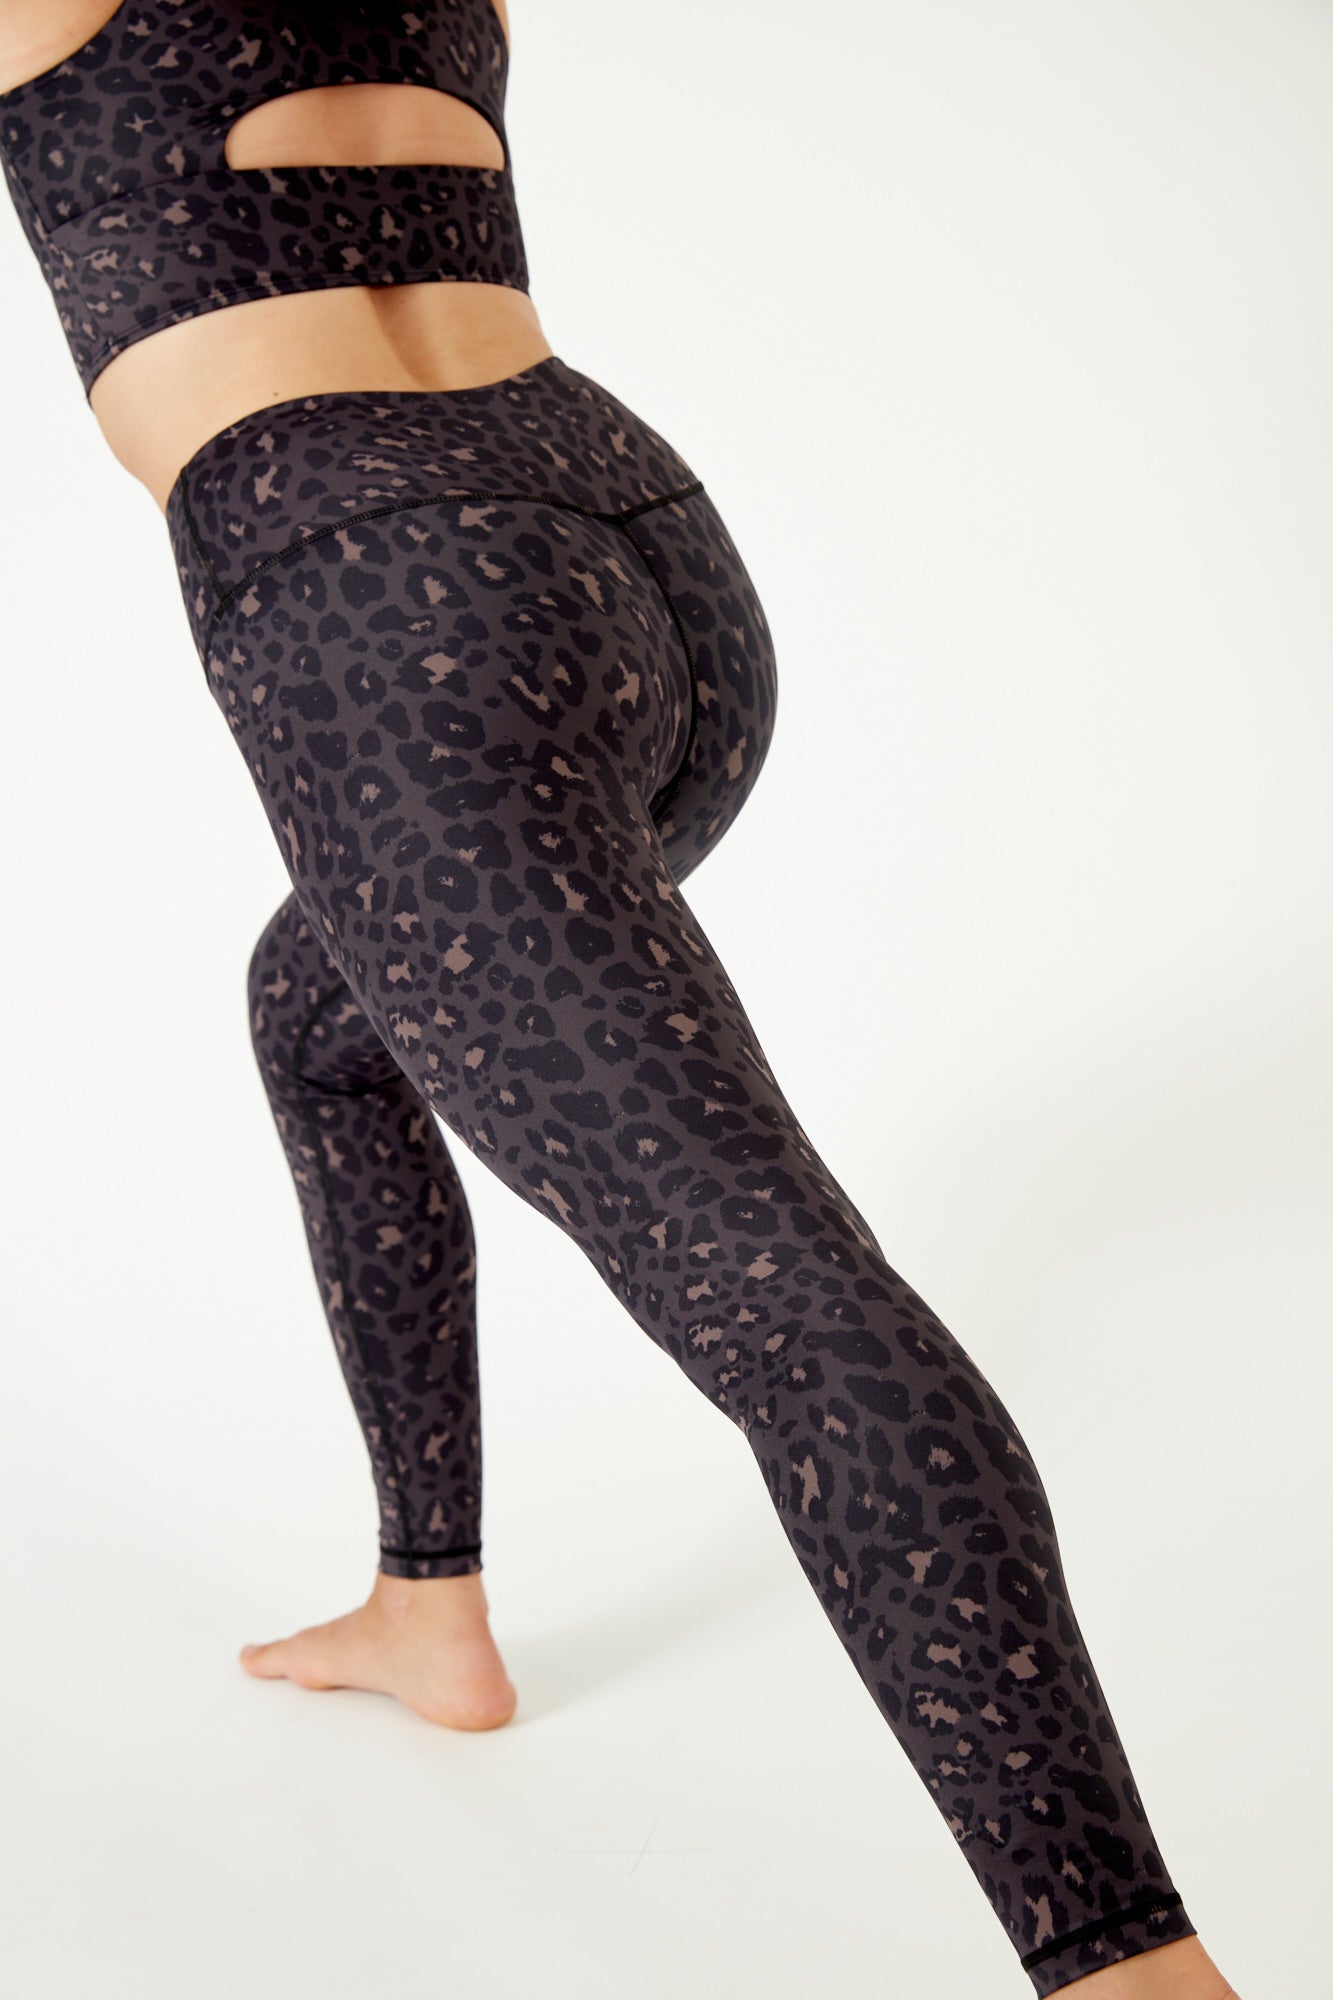 NEW LULULEMON Align 25 Pant 2 Wild Thing Camo Brown Earth Multi